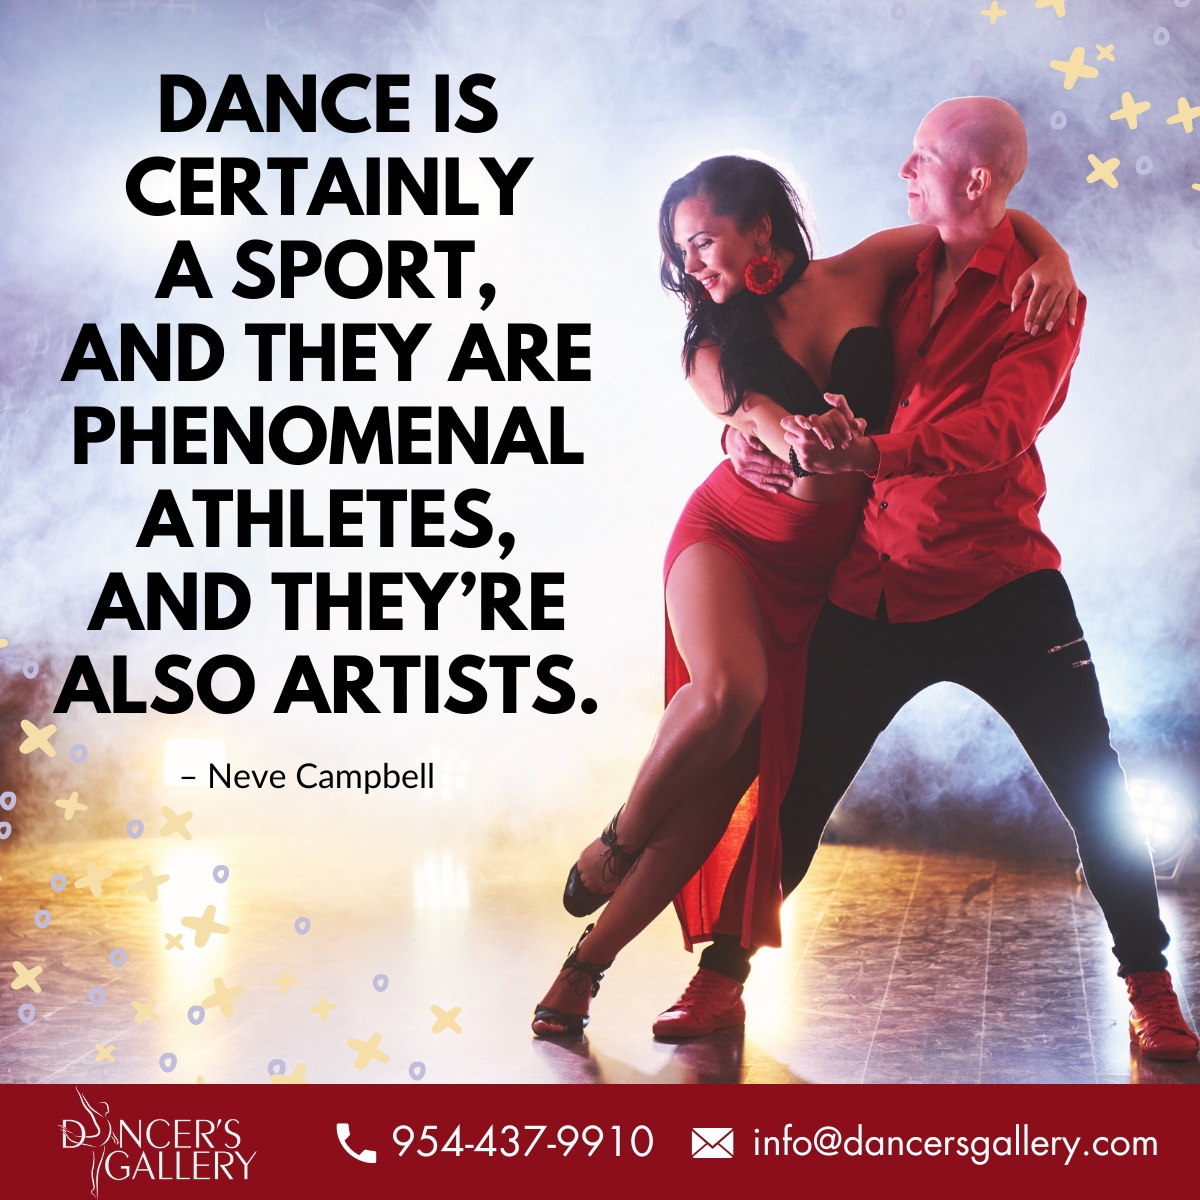 “Dance is certainly a sport, and they are phenomenal athletes, and they’re also artists.” – Neve Campbell

#quoteoftheday #dancestudiomiami #danceclasses #dancelover #dancelove #dancegoals #dancelife #lovefordance #miamidanceclasses #coopercitydancestudio #dancestudiocoopercity